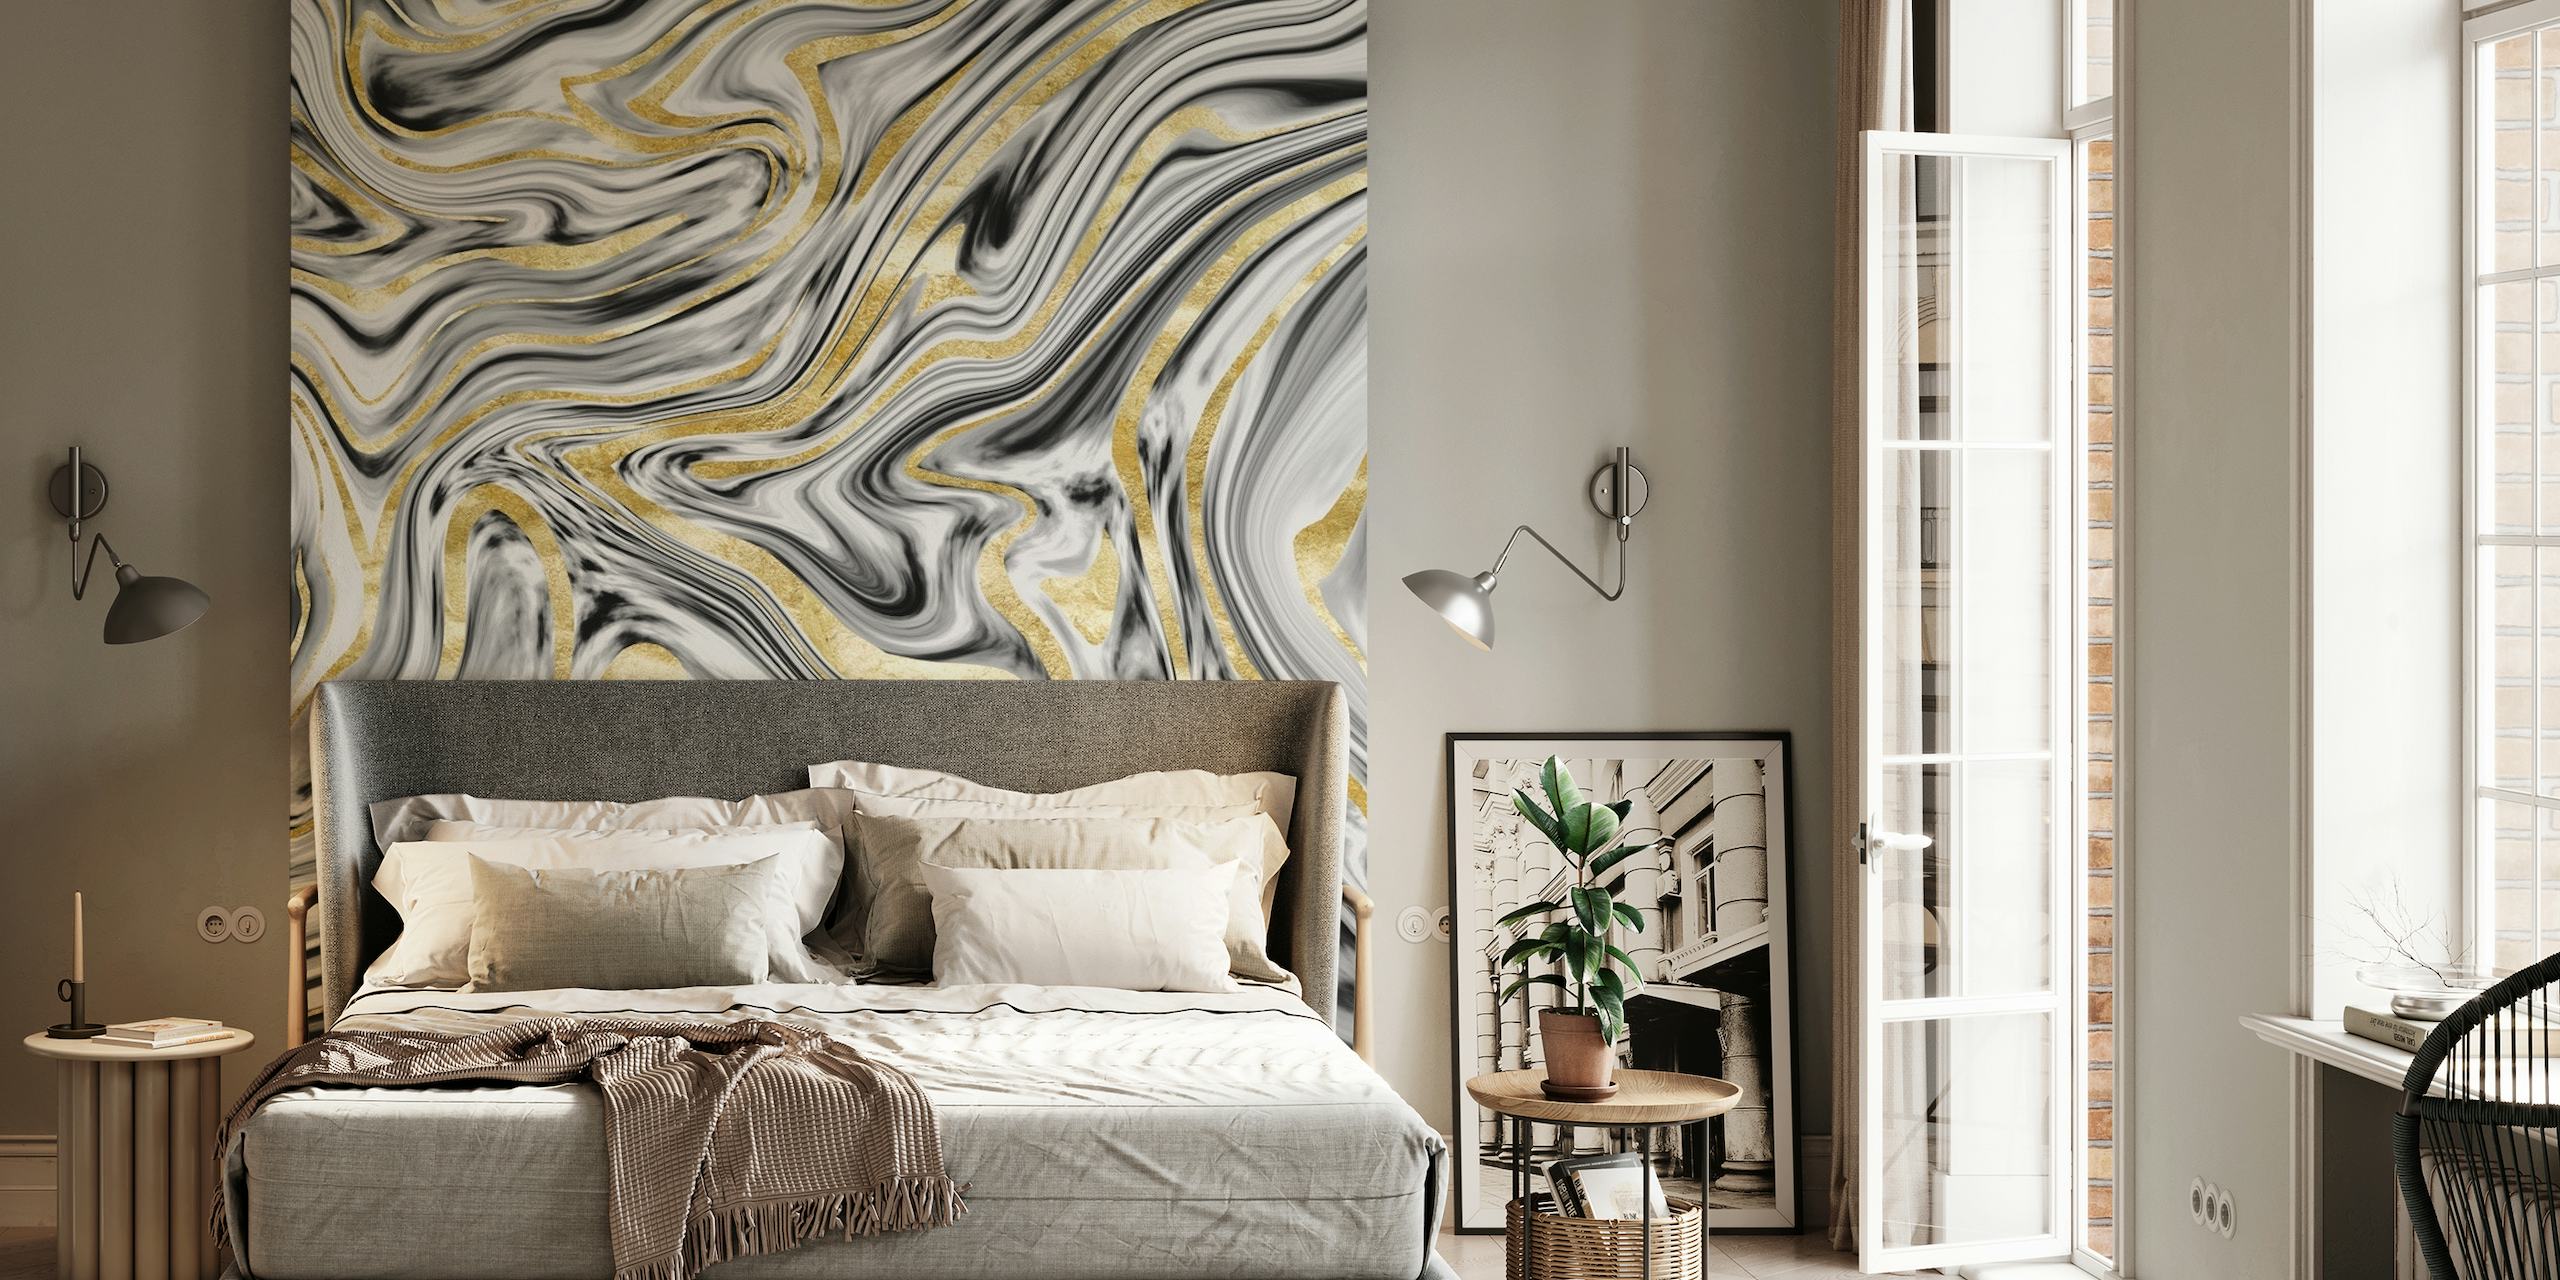 Swirling gray, black, white, and gold marble pattern wall mural